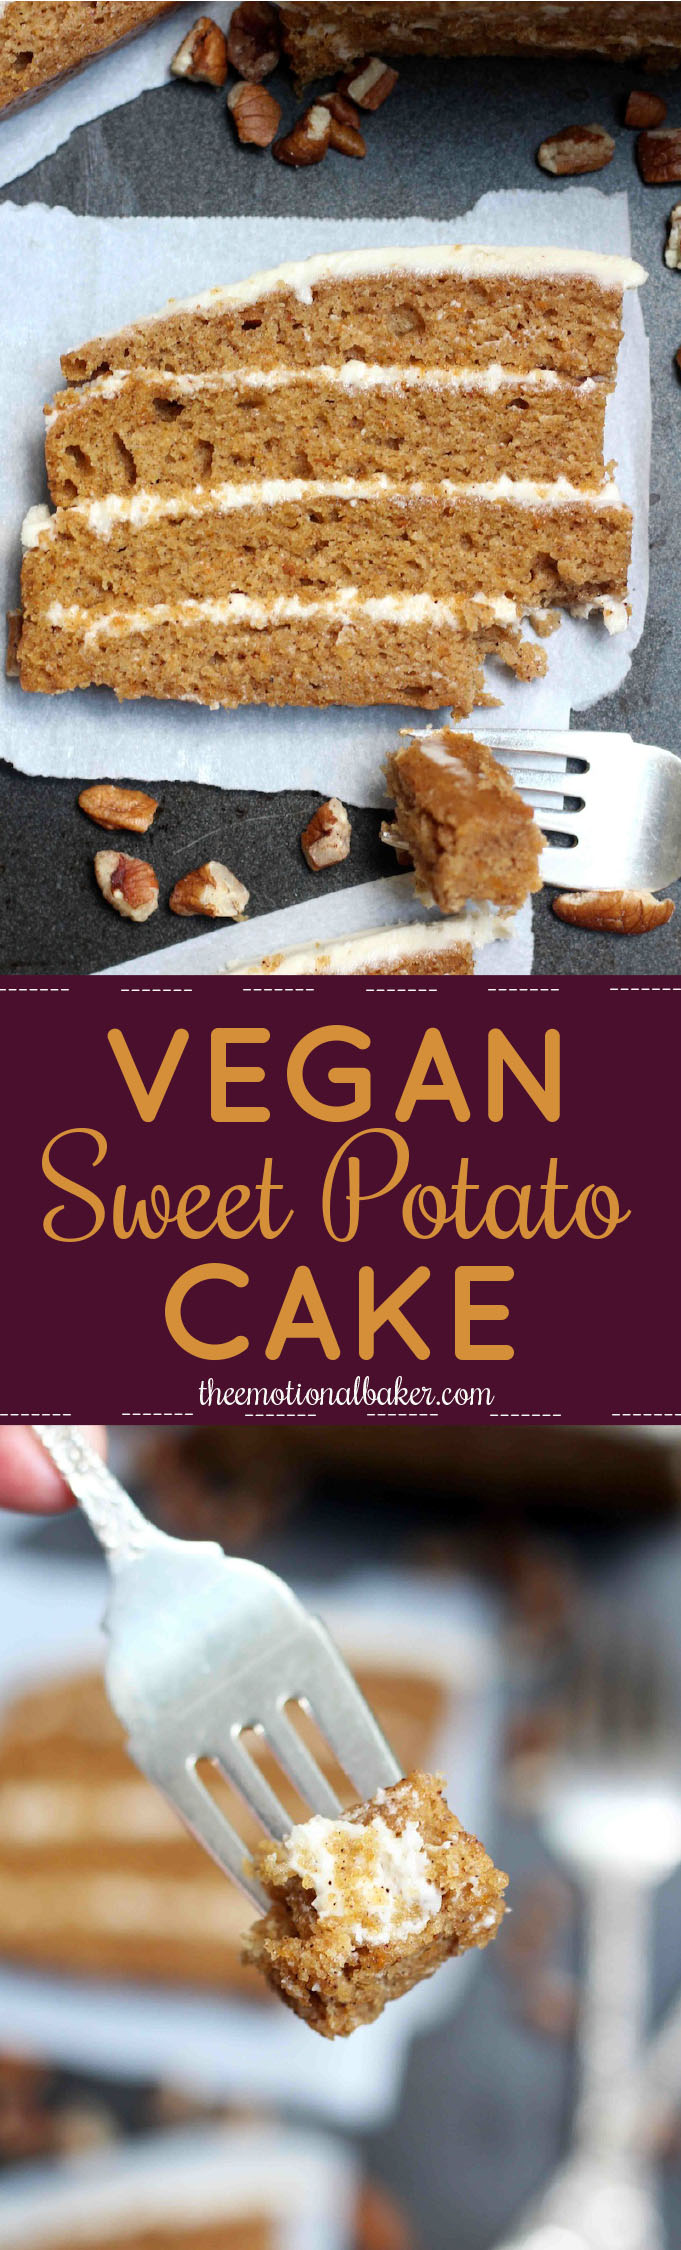 This Vegan Sweet Potato Cake is packed with flavor and perfect for any celebration. Added bonus - it's one of the easiest layer cakes you'll ever make!